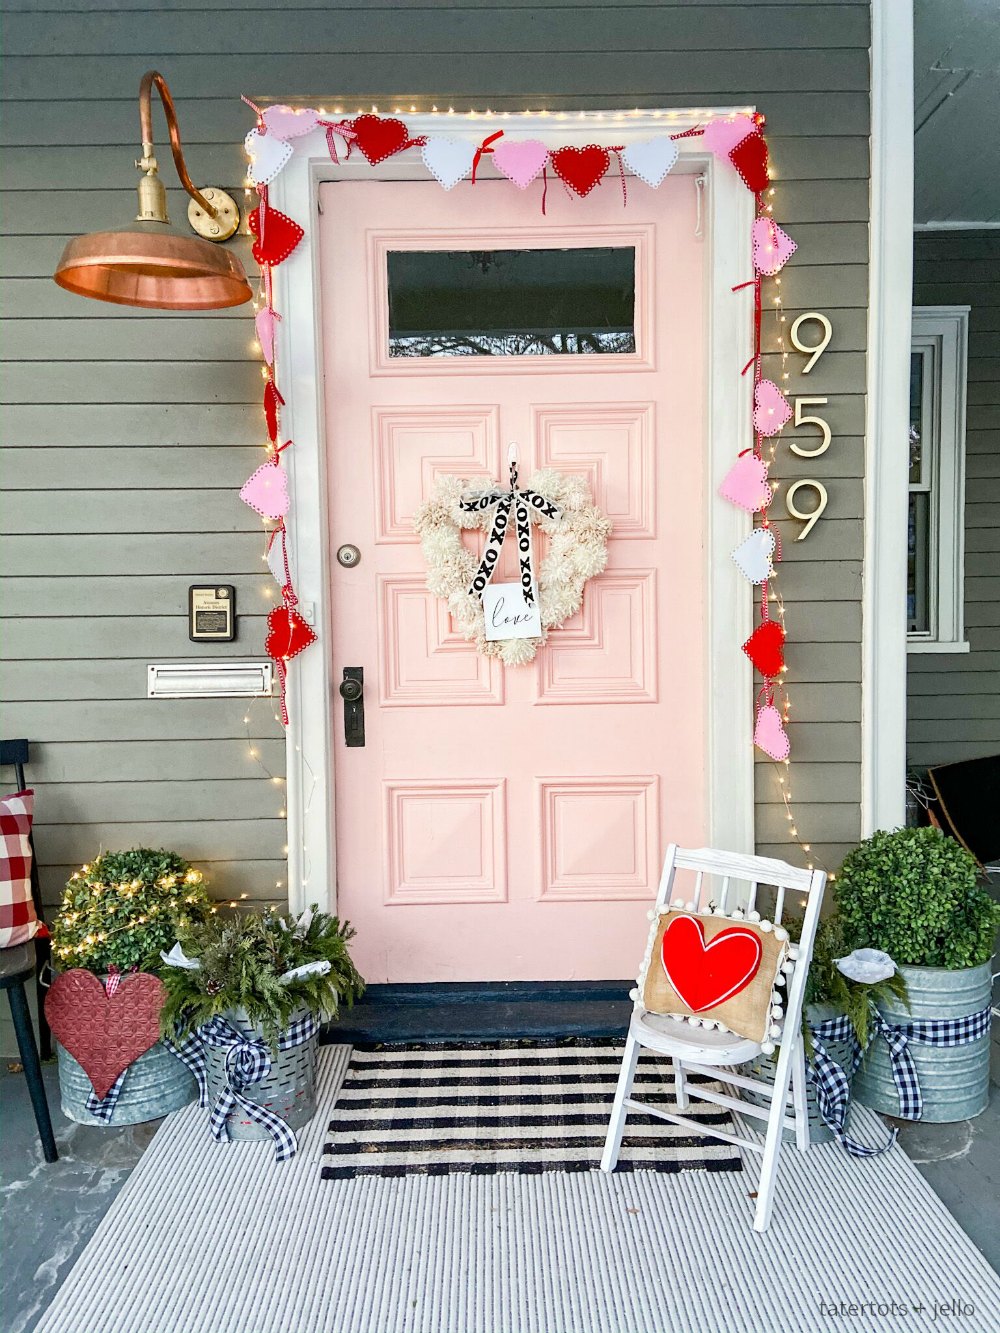 How to Make a Valentine Heart Pom Pom Yarn Wreath. Brighten up your door this winter with a textured pom pom wreath for valentine's Day! 